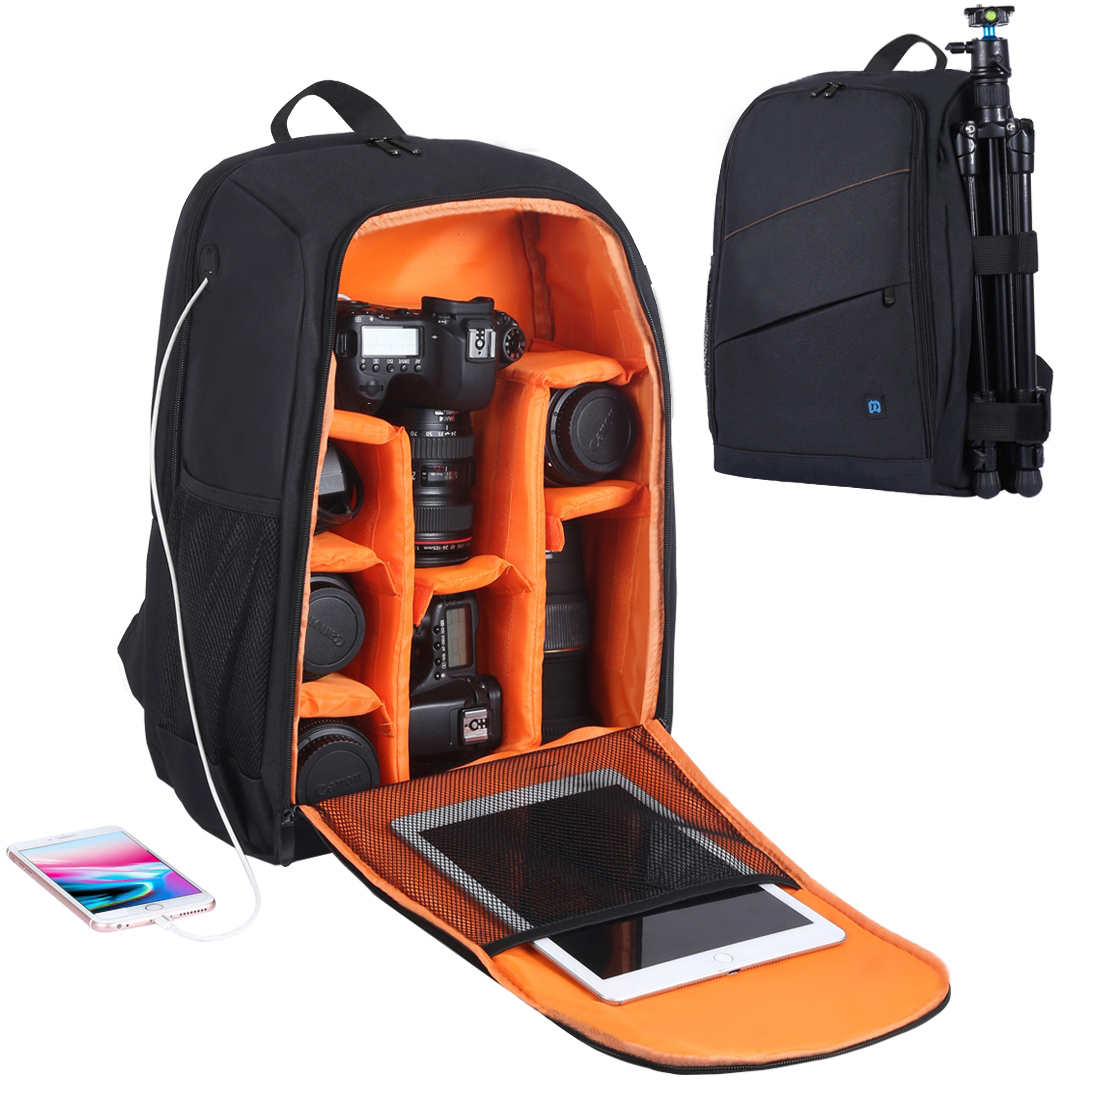 Camera Backpack Waterproof Shockproof Bag with Rain Cover for DSLR SLR Cameras Lenses Laptop Tablet Photography Accessories